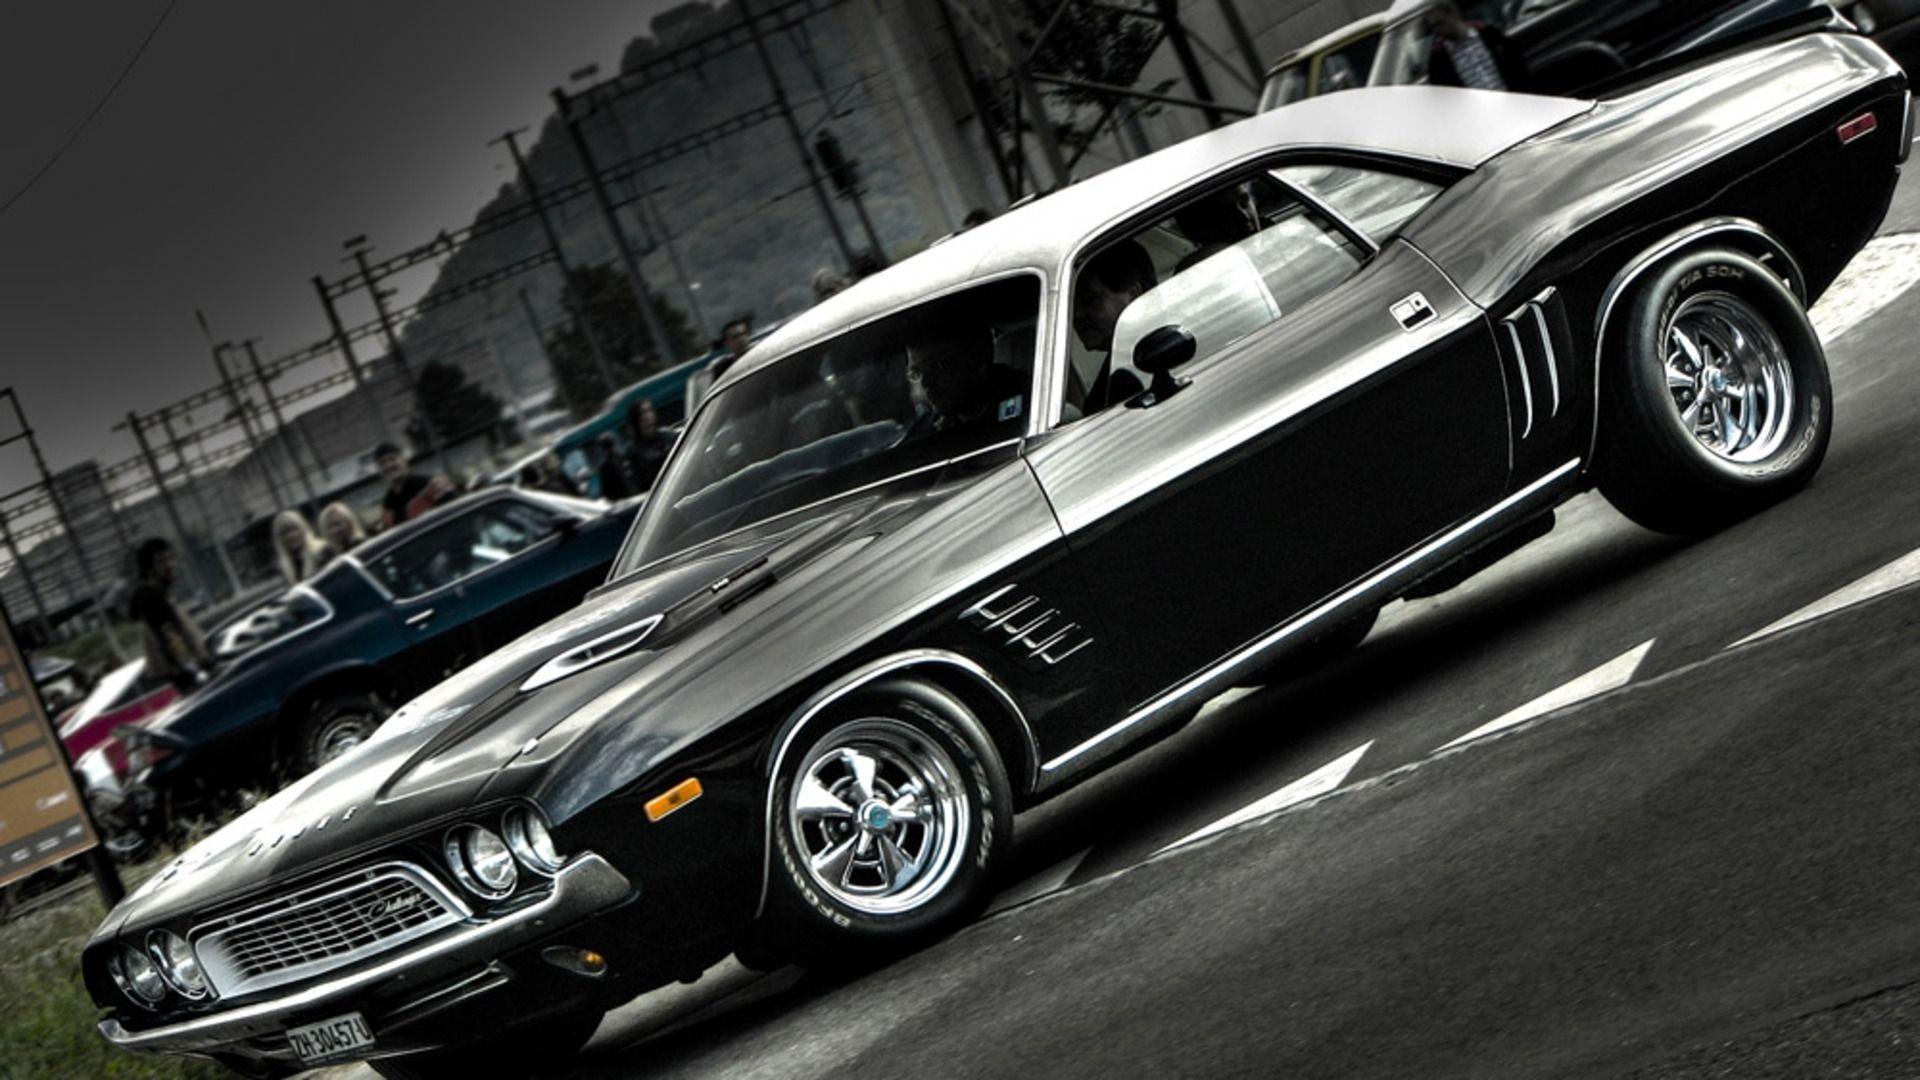 Hd Wallpapers Of Old Muscle Cars